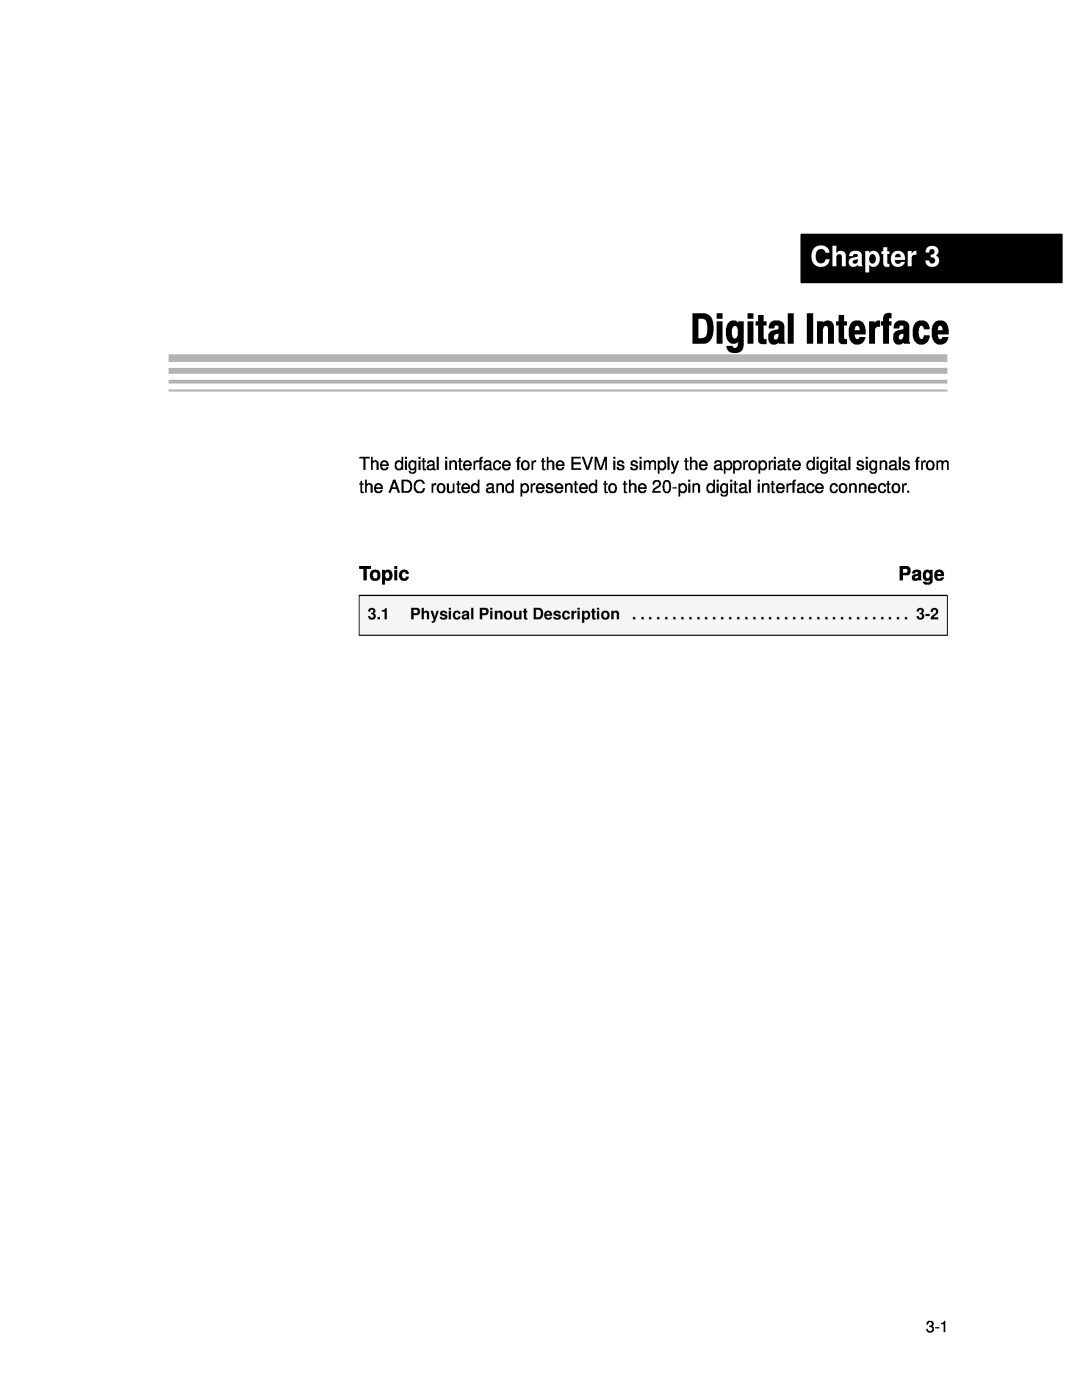 Texas Instruments TLC3578EVM manual Digital Interface, Chapter, Topic, Page 